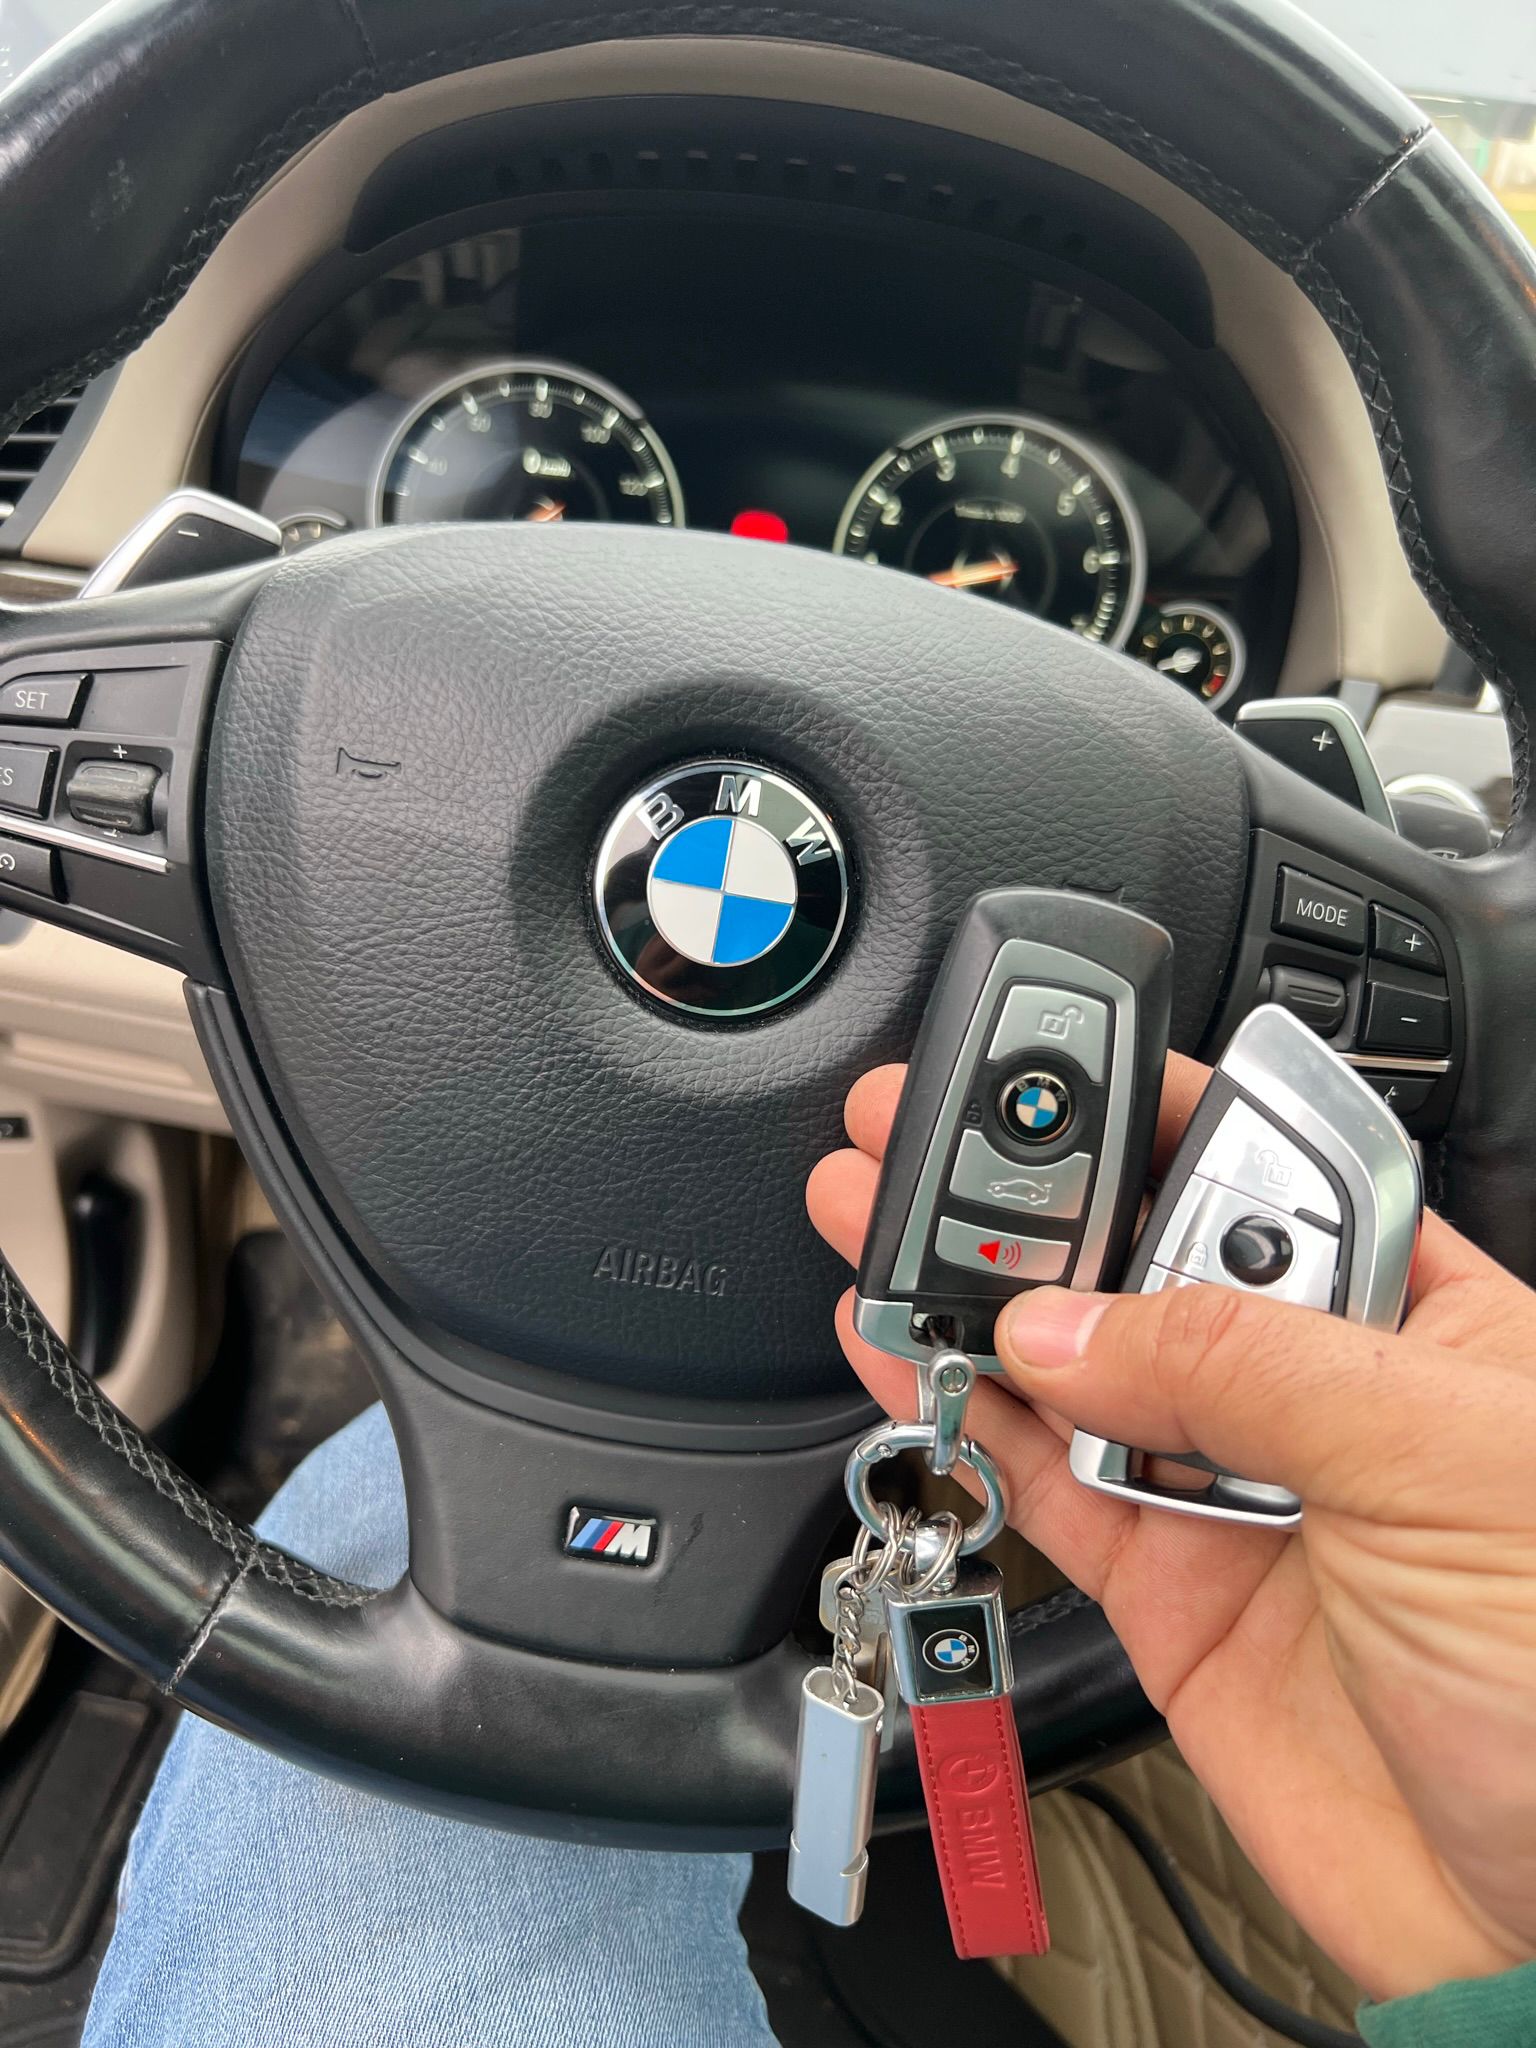 Replacement car keys made on site by LAN locksmith service (19)